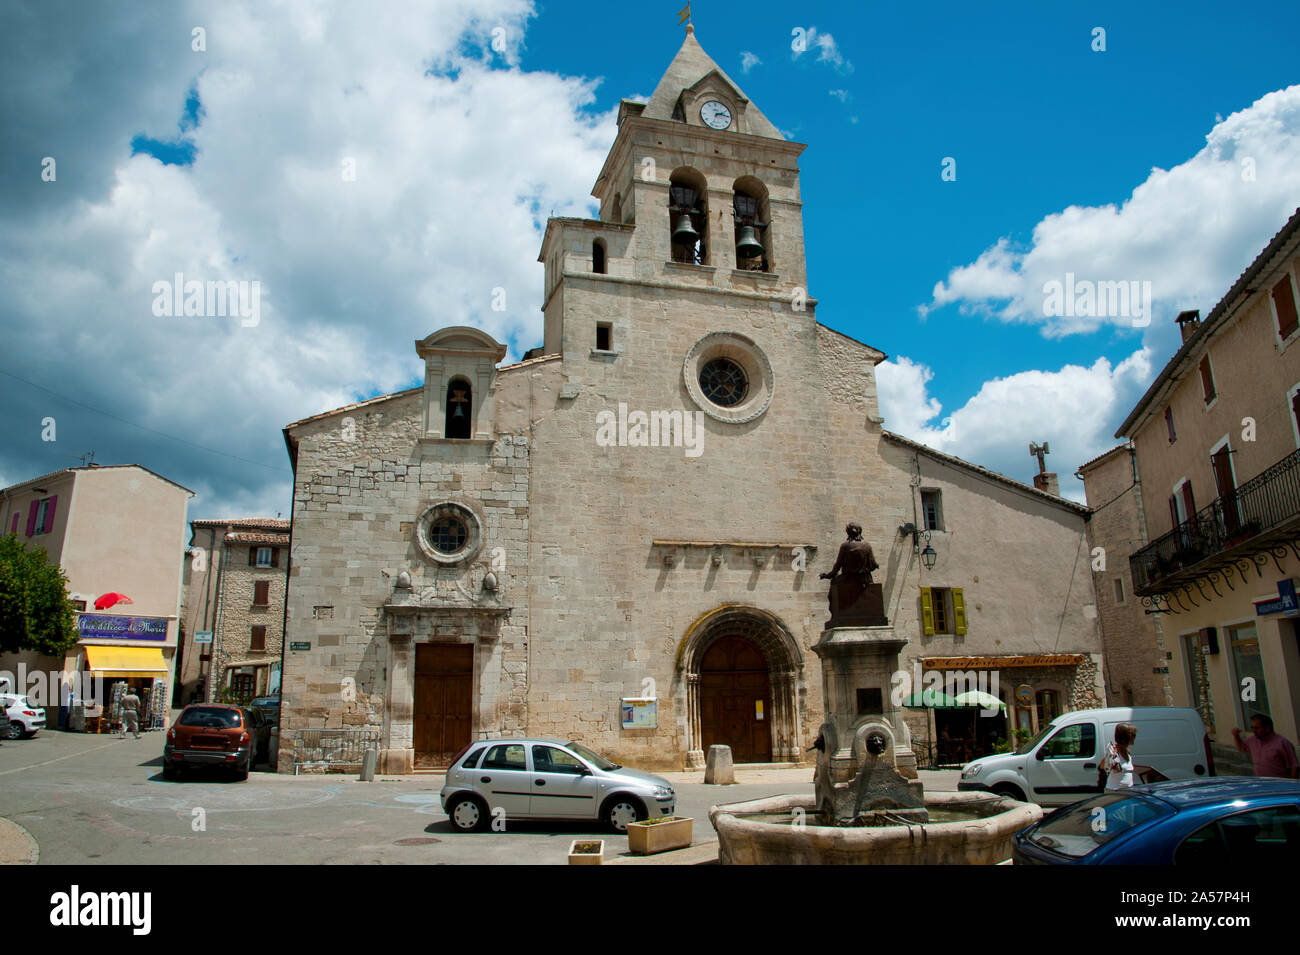 Low angle view of a church, Sault, Vaucluse, Provence-Alpes-Cote d'Azur, France Stock Photo